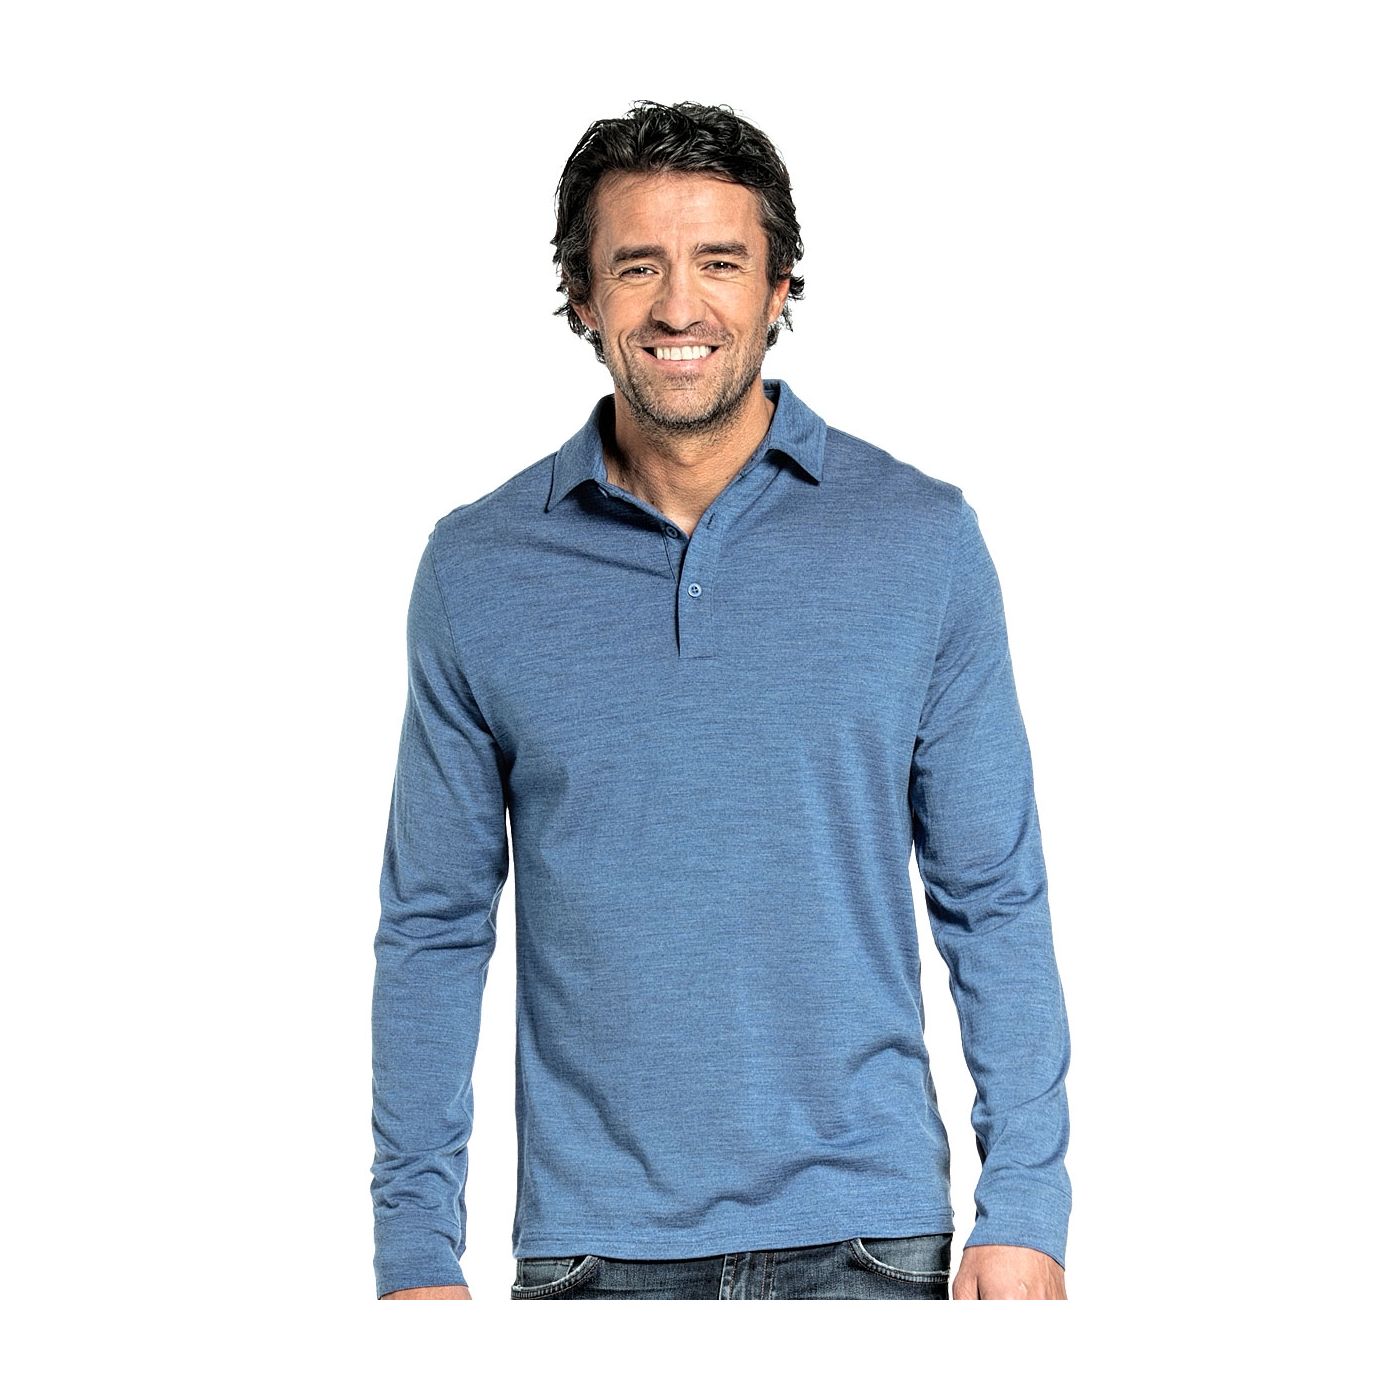 Polo shirt long sleeve for men made of Merino wool in Bright blue